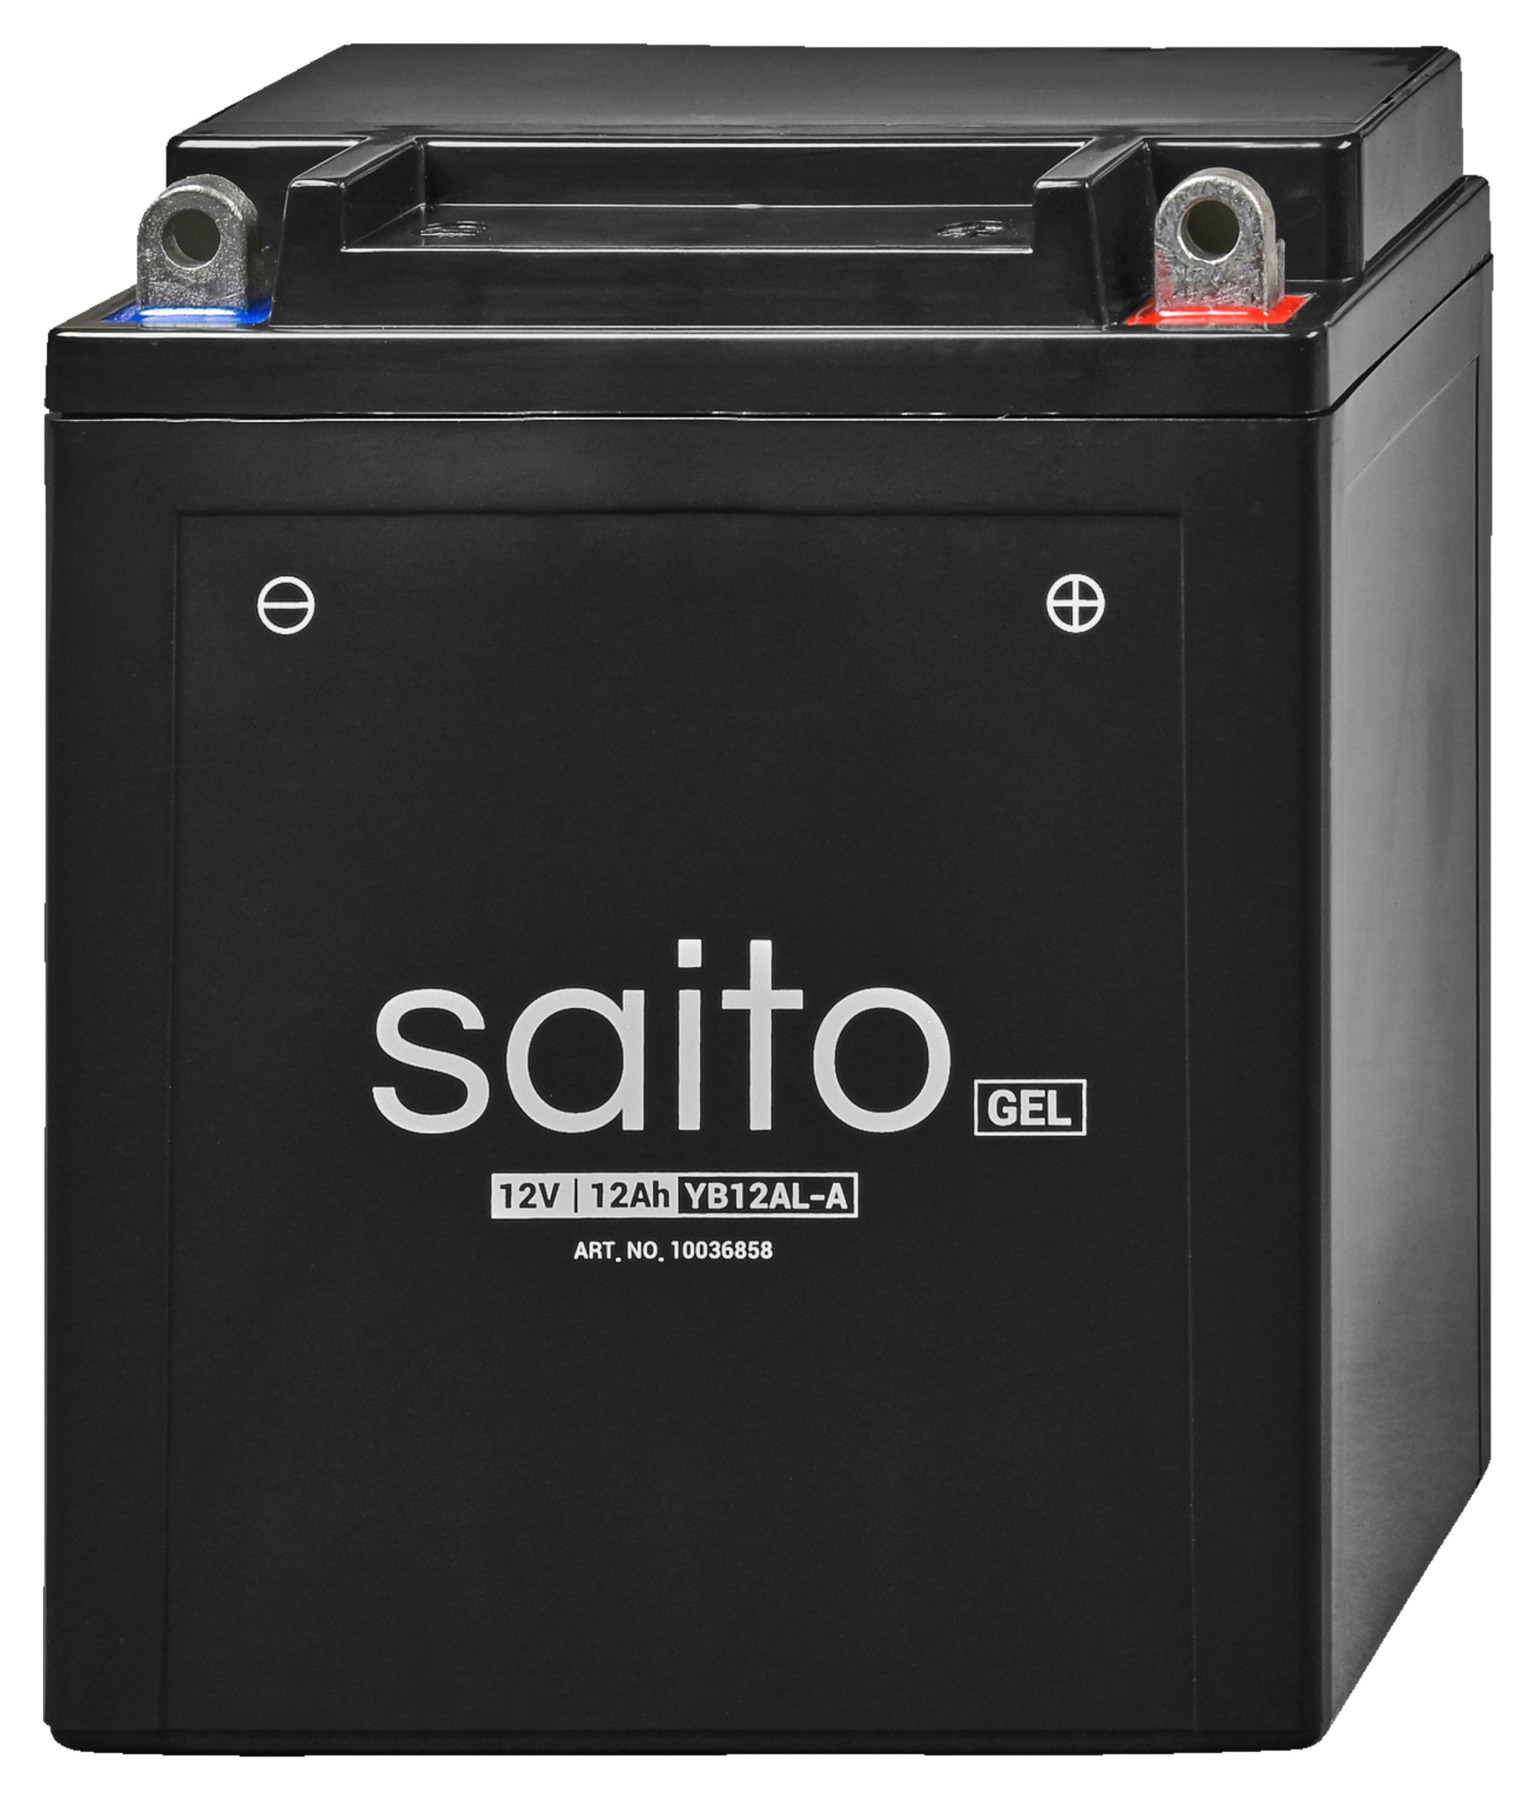 Substantial Anonymous Ligation Buy SAITO GEL BATTERY YB12AL-A 12V/12AH SAE145A | Louis motorcycle clothing  and technology